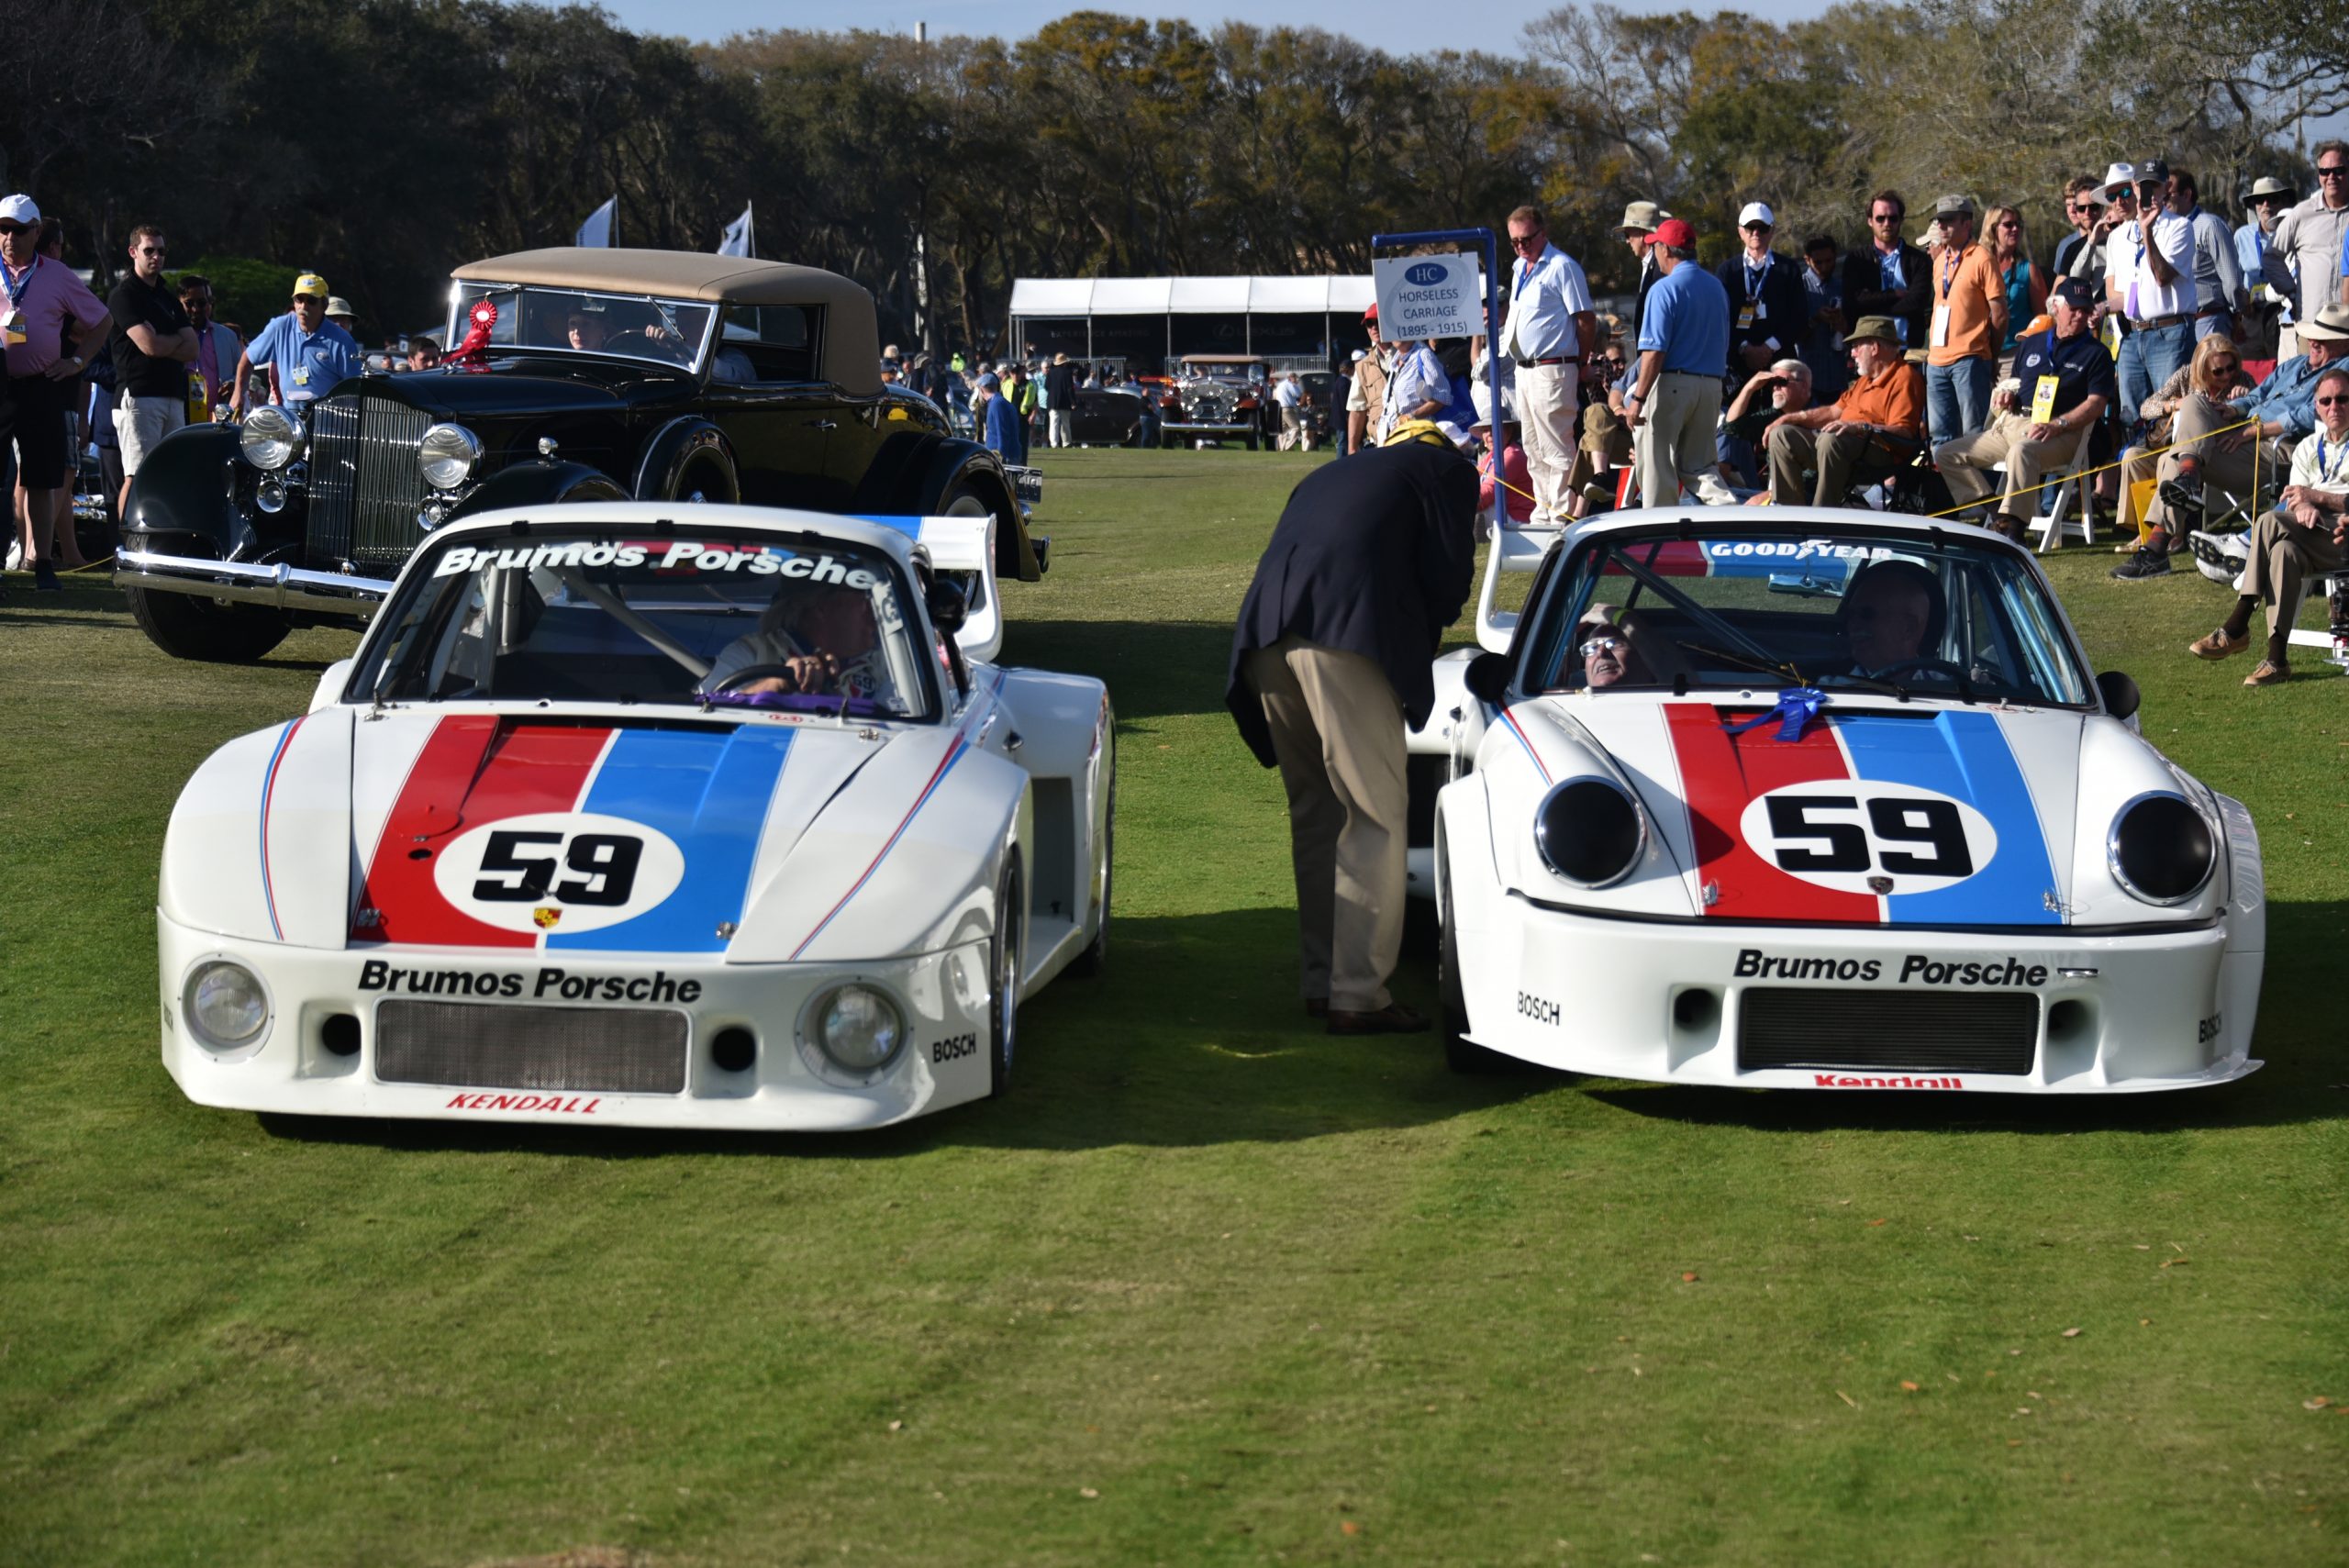 Two Porsche AG Brumos at the Amelia Island Concours d'Elegance